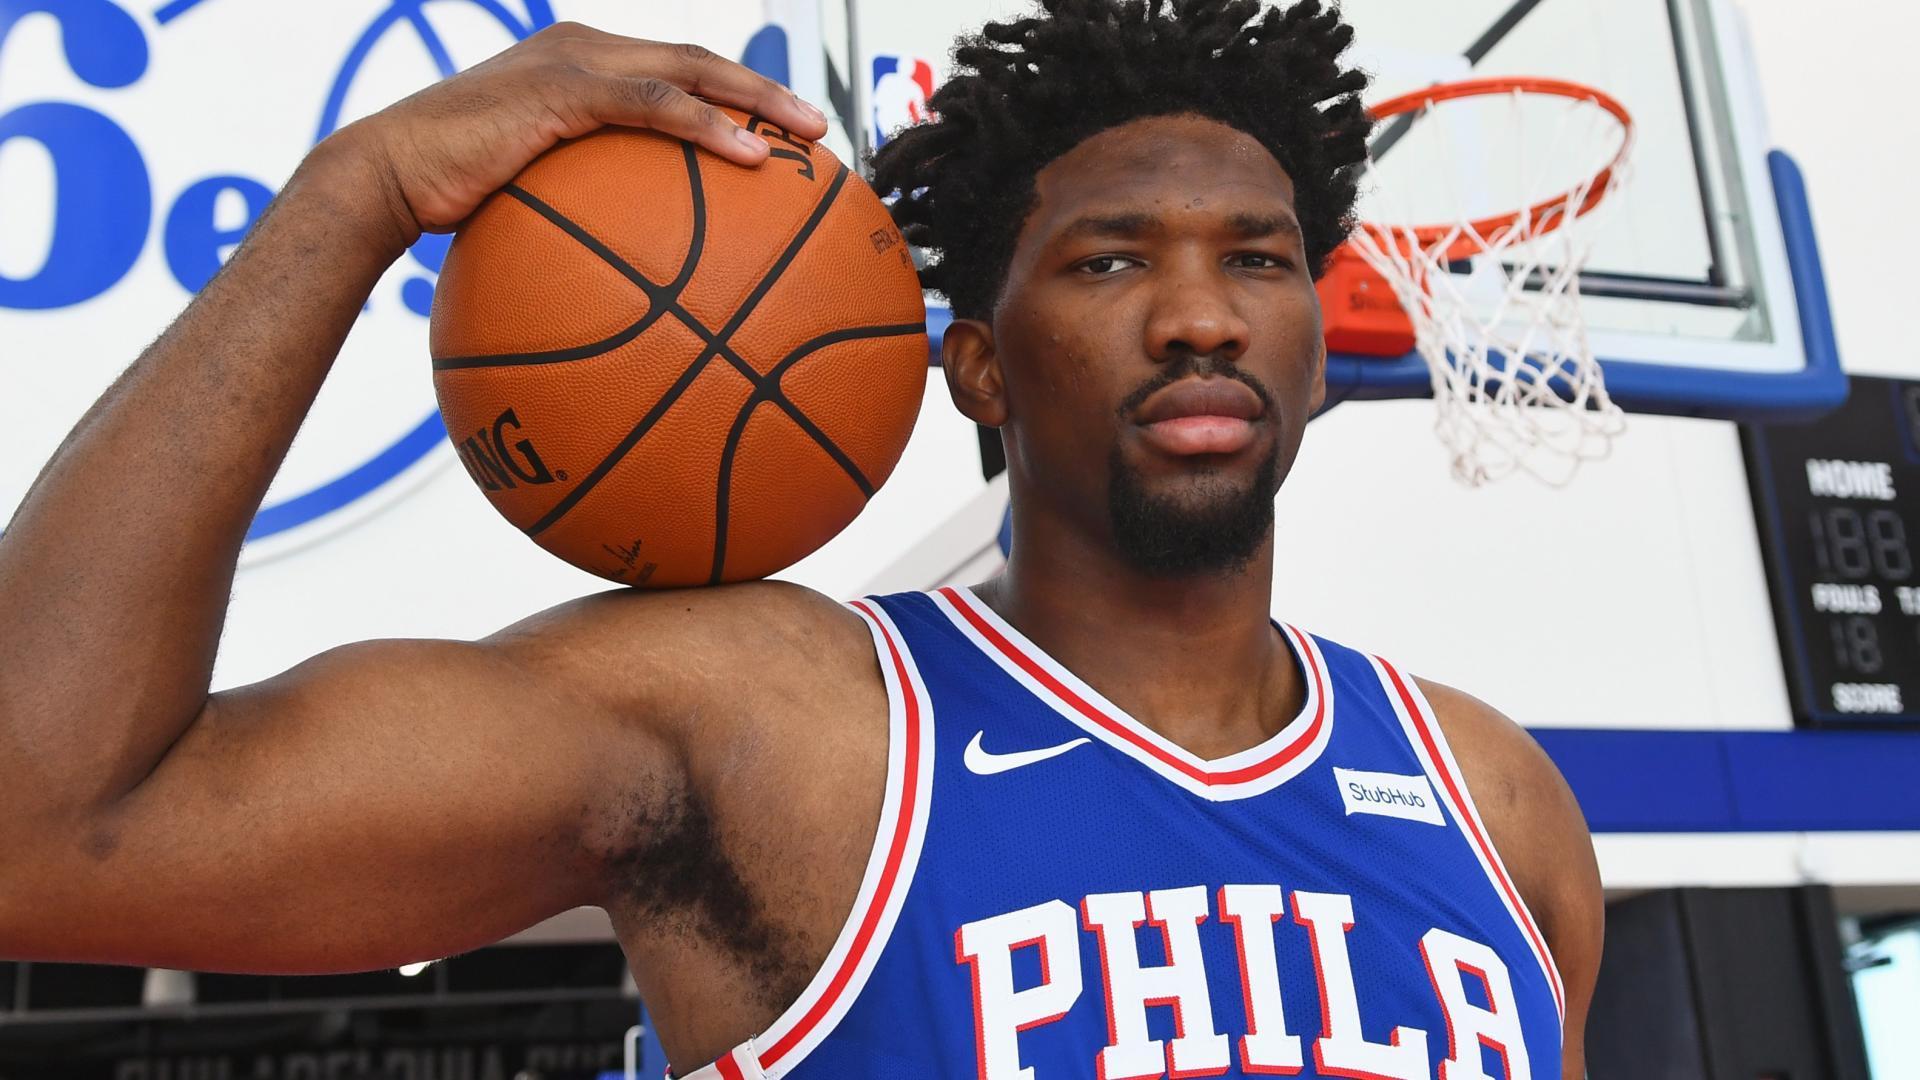 Blogtable: Wise or risky move by Philadelphia 76ers to sign Joel